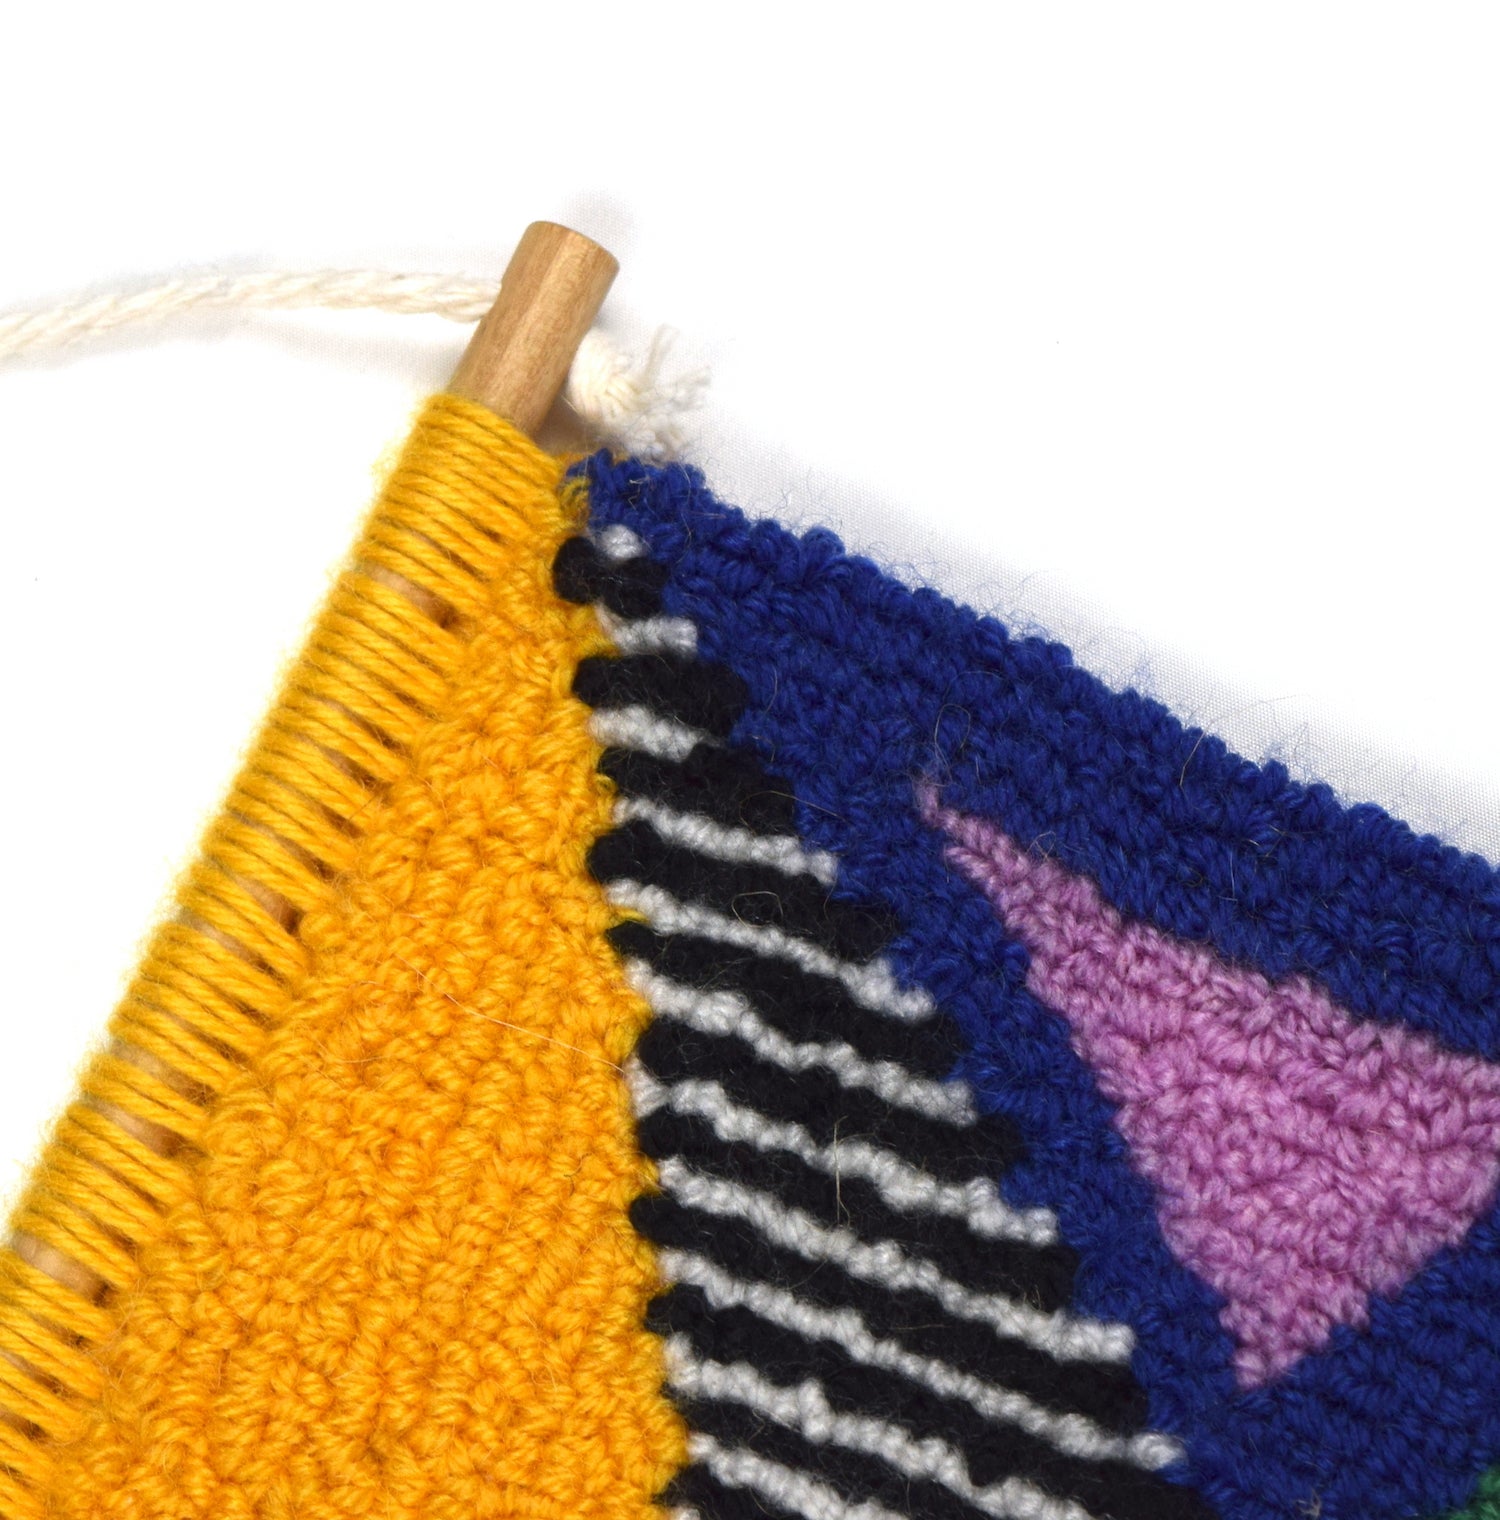 A contemporary hand punched miniature, using yellow, blue, pink, green, orange and purple triangular block colours accented by black and white stripes. Using British Wool and yarn from previous projects close up.